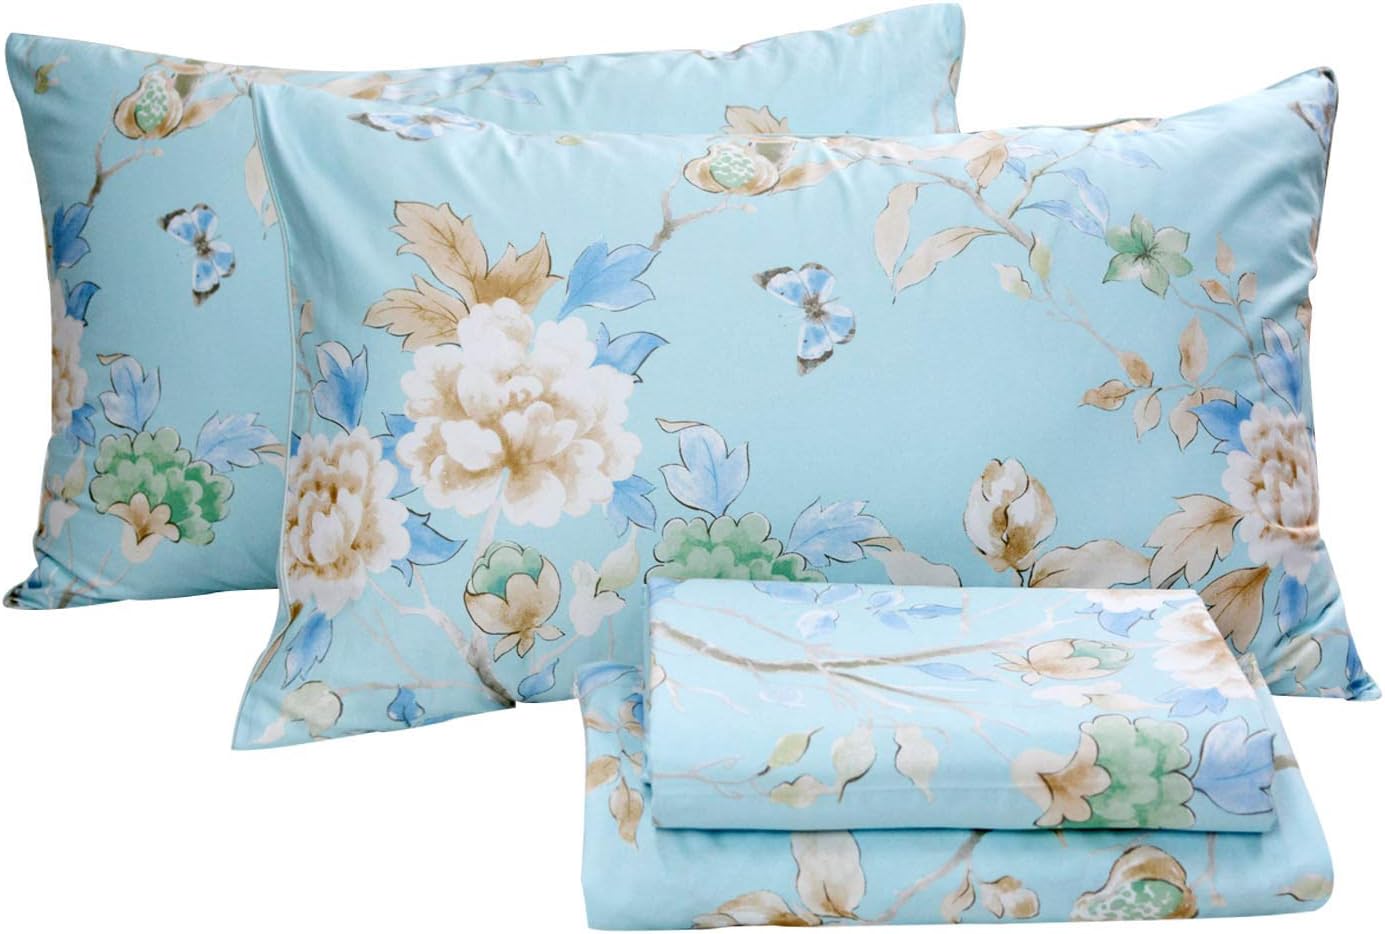 FADFAY Floral Bedding Shabby Blue Bird Print Bed Sheet Set Luxury Bedding Collections 800 Thread Count 100% Egyptian Cotton Deep Pocket, 4 Piece-Twin Size